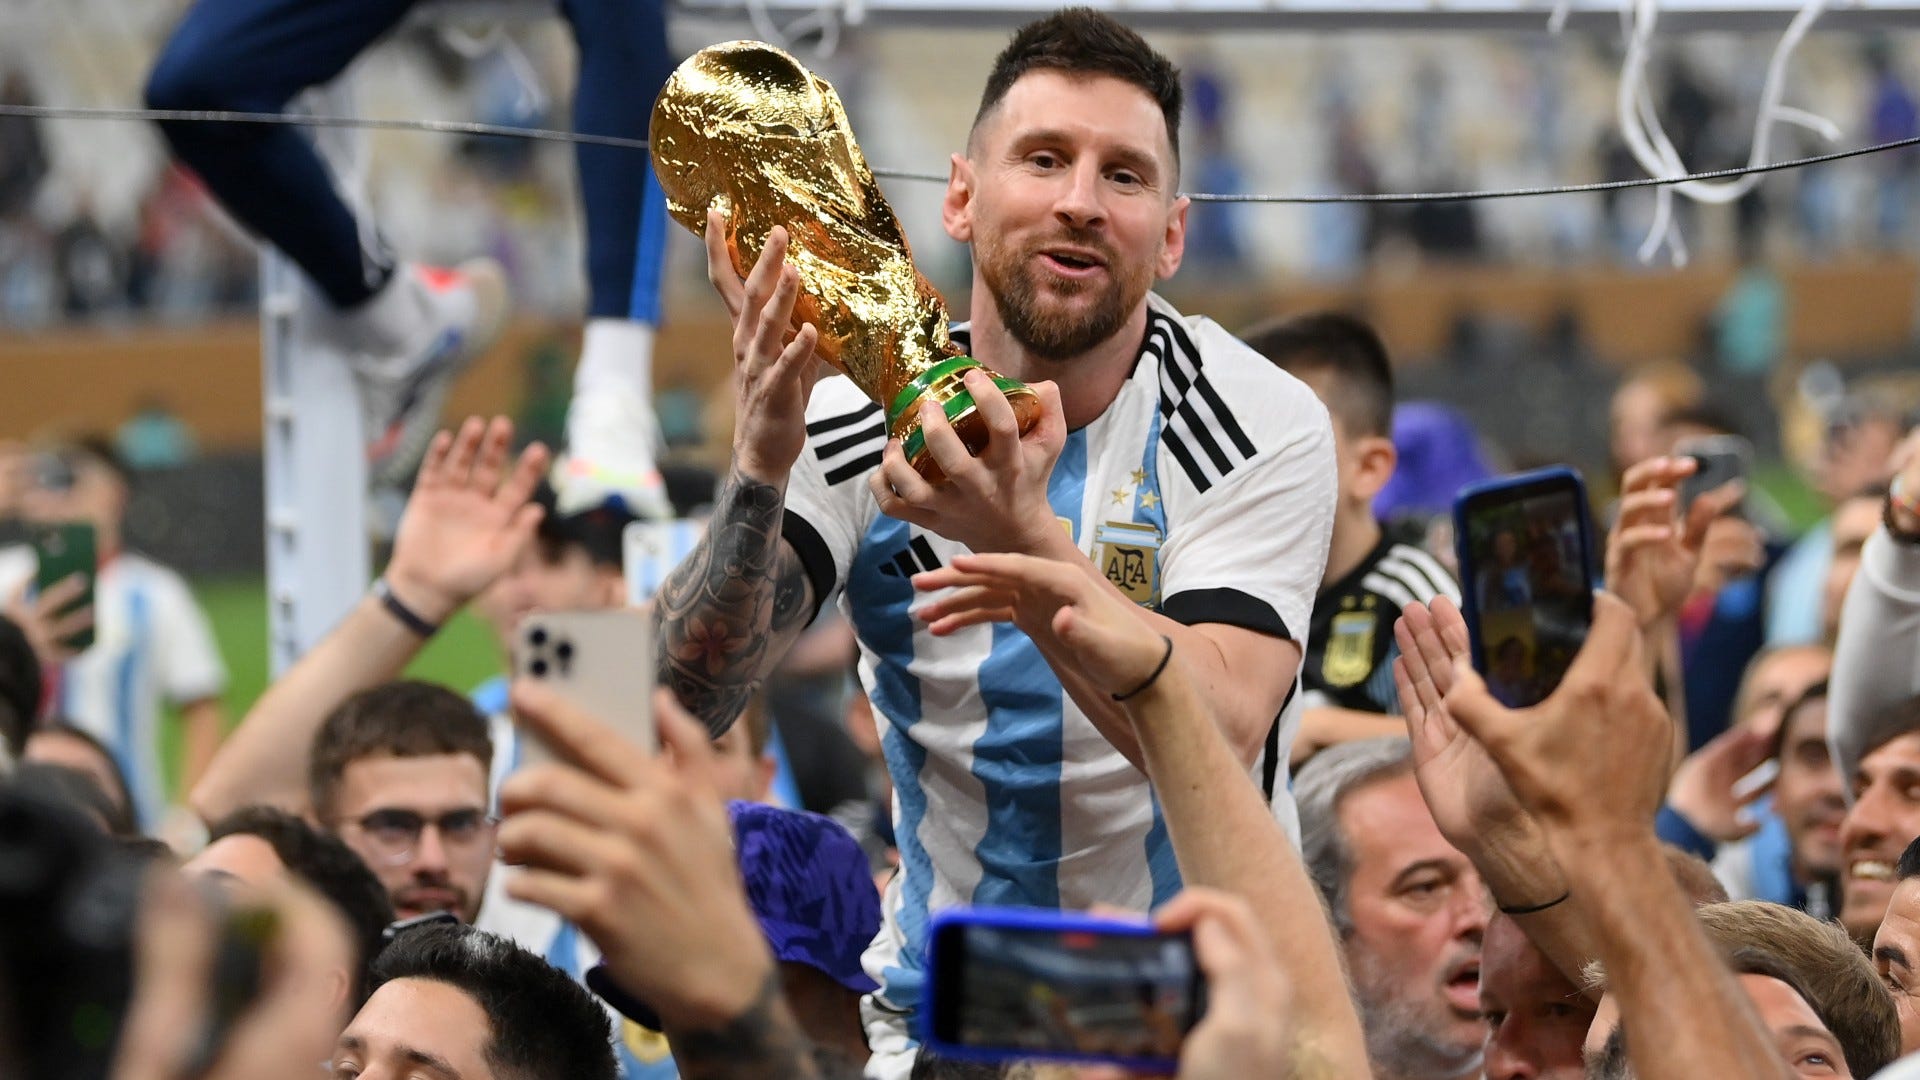 ‘God wanted me to be world champion’ - Lionel Messi claims 2022 World Cup triumph was destiny after previous heartbreaks with Argentina